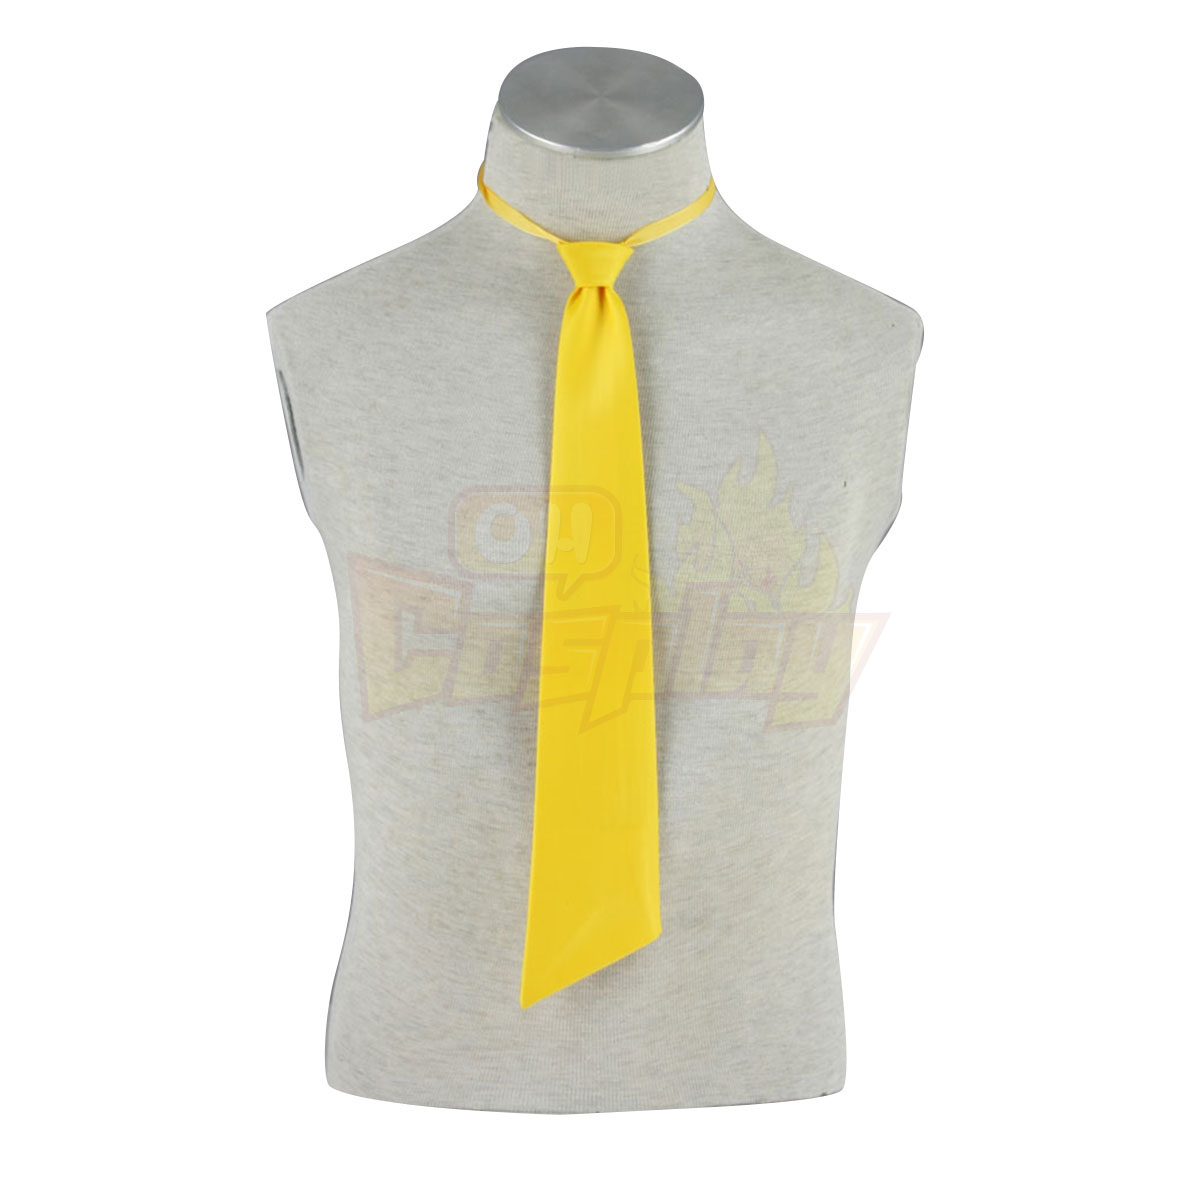 Vocaloid Kagamine Len 2ND Cosplay Costumes UK